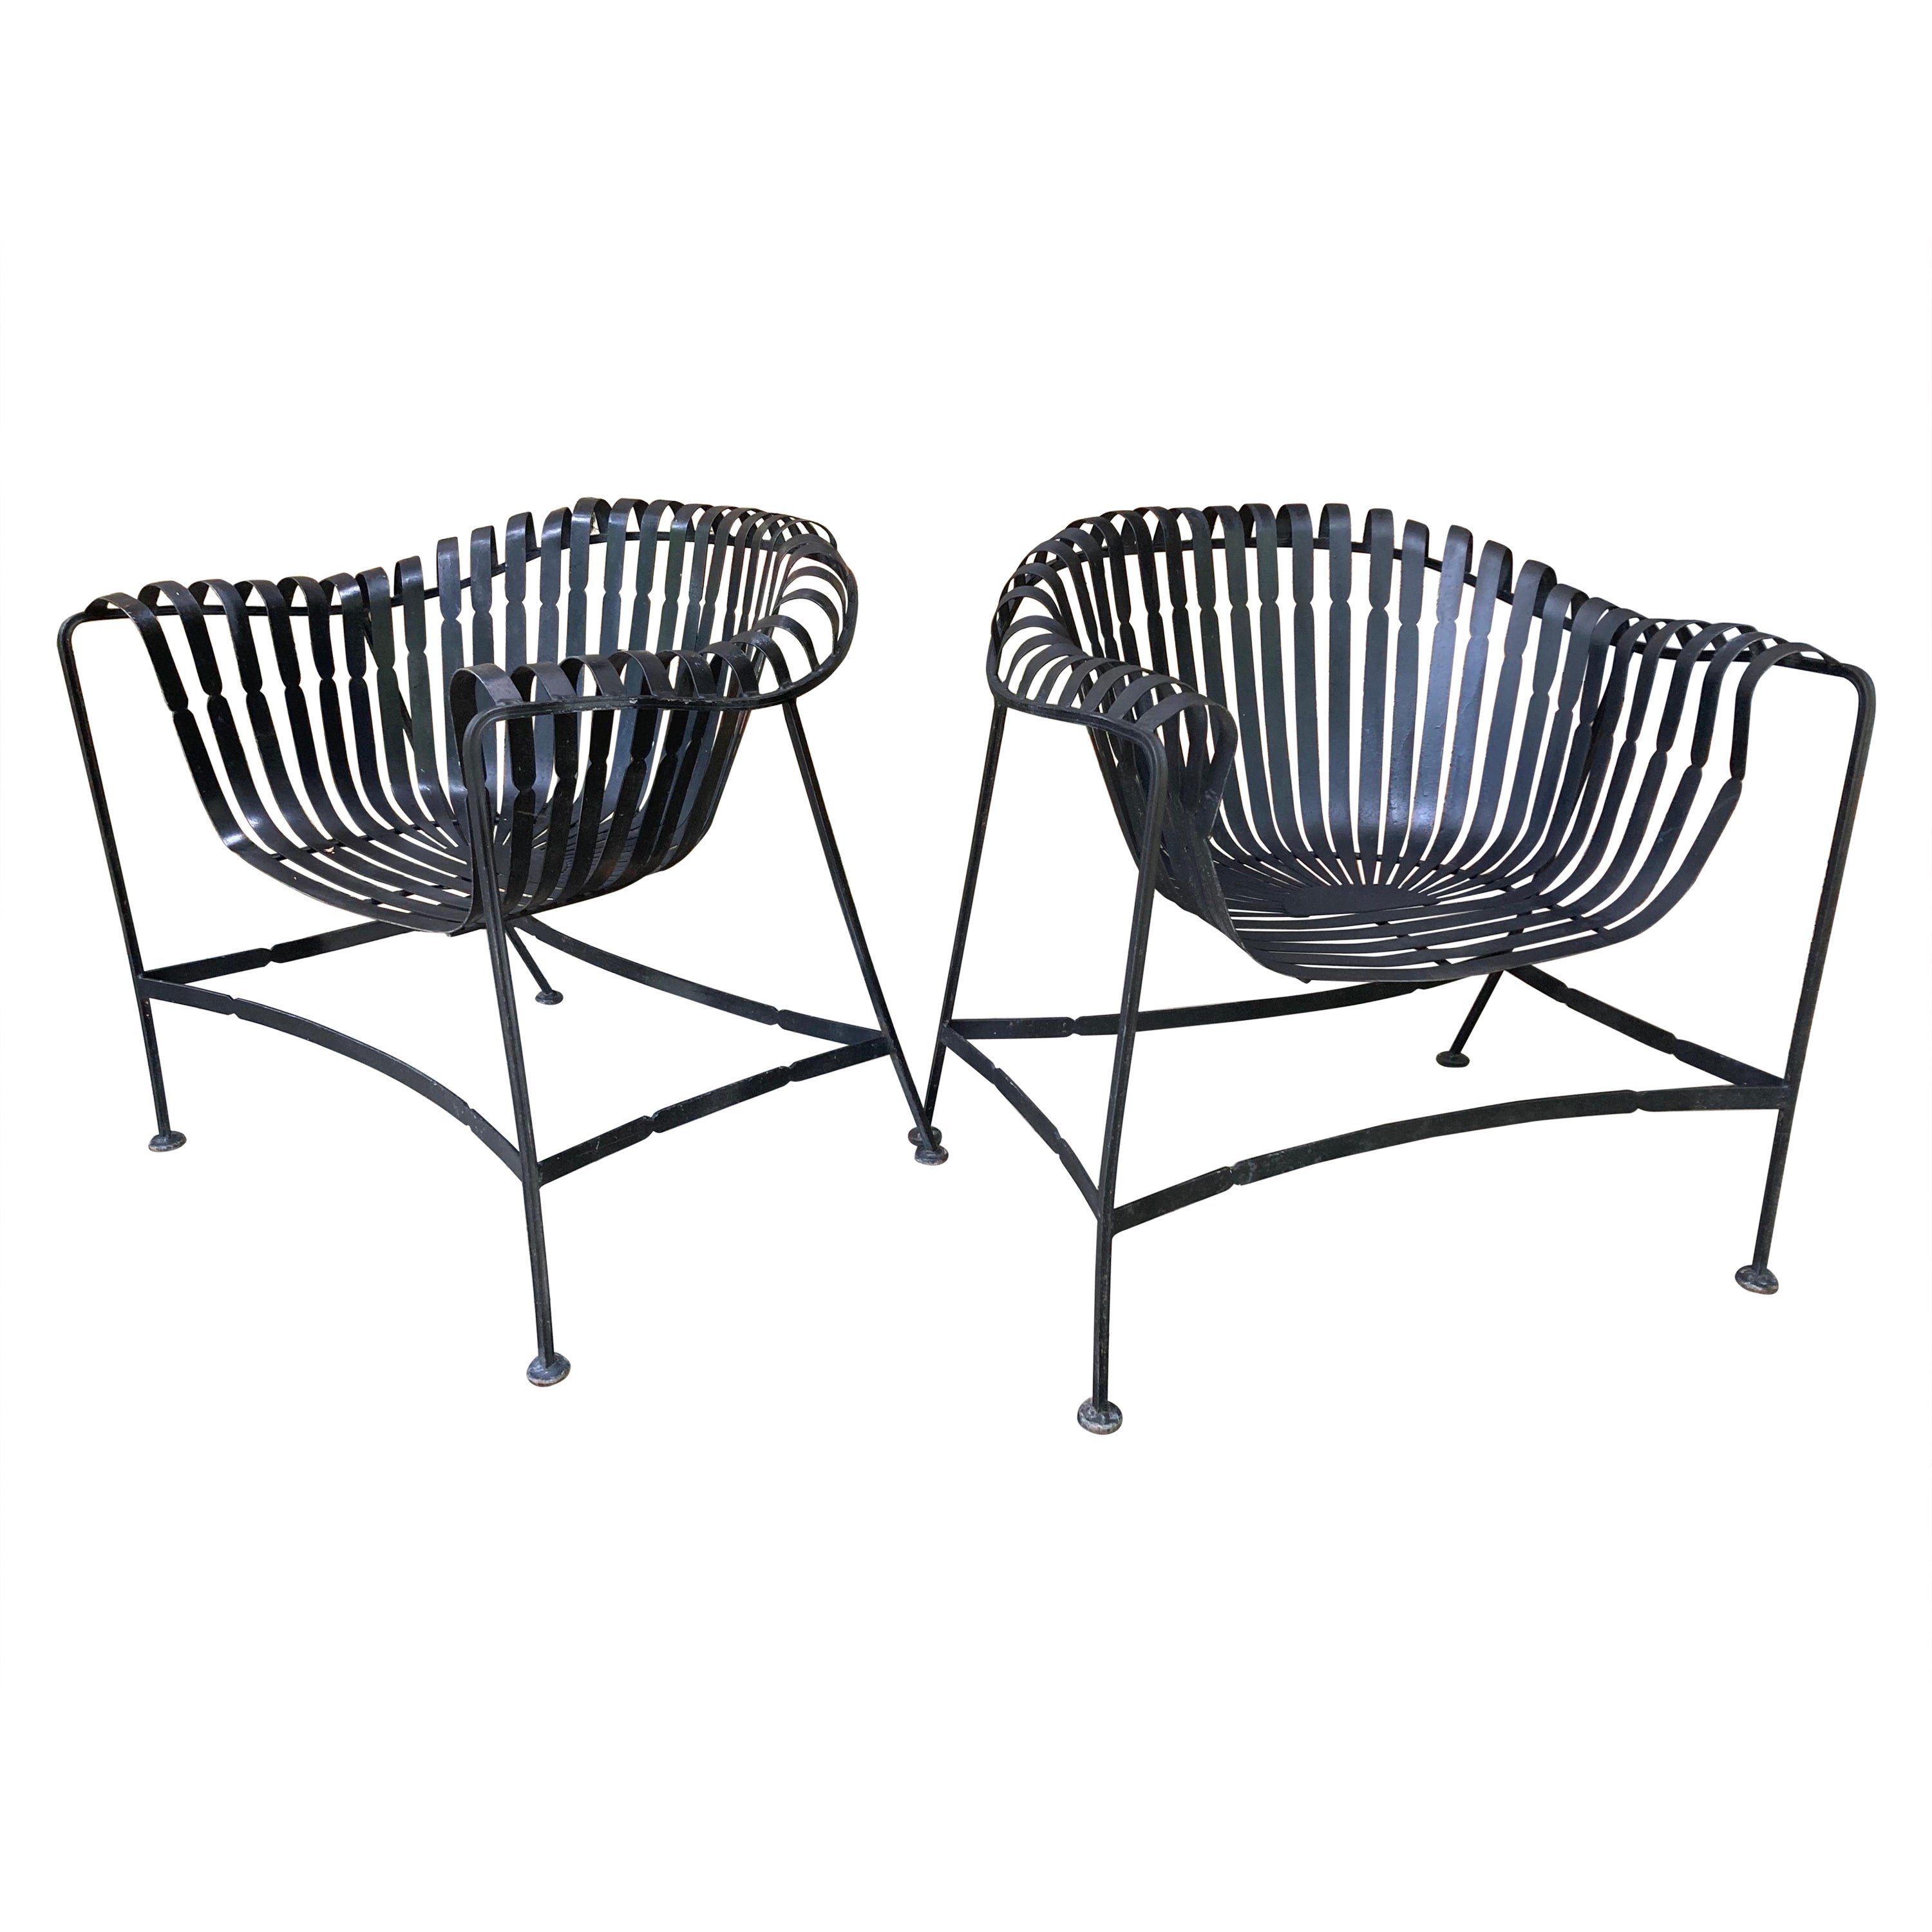 mid century modern russell woodard strap iron loungers - a pair For Sale